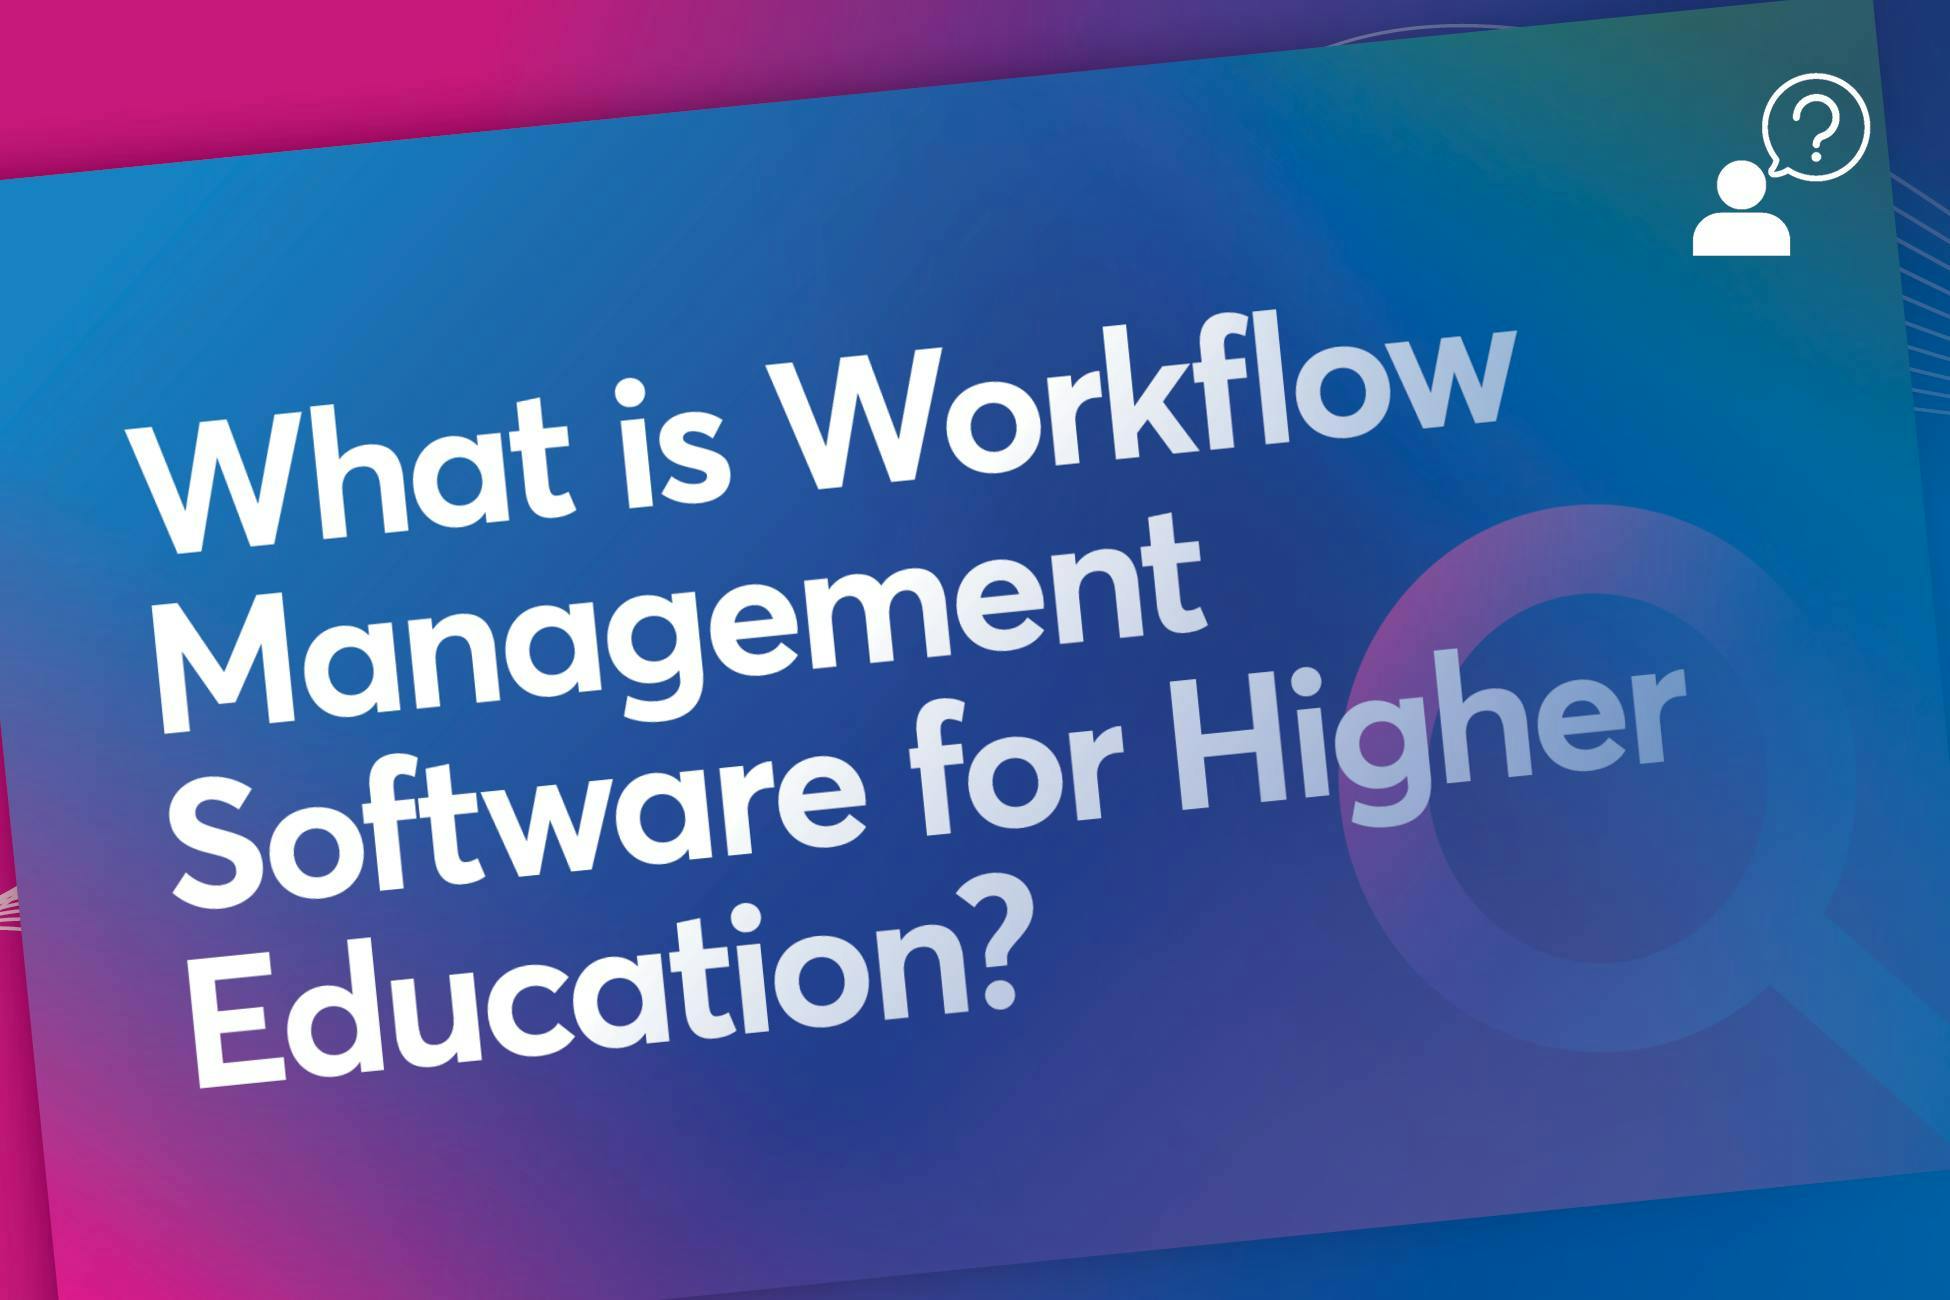 What is Workflow Management Software for Higher Education?